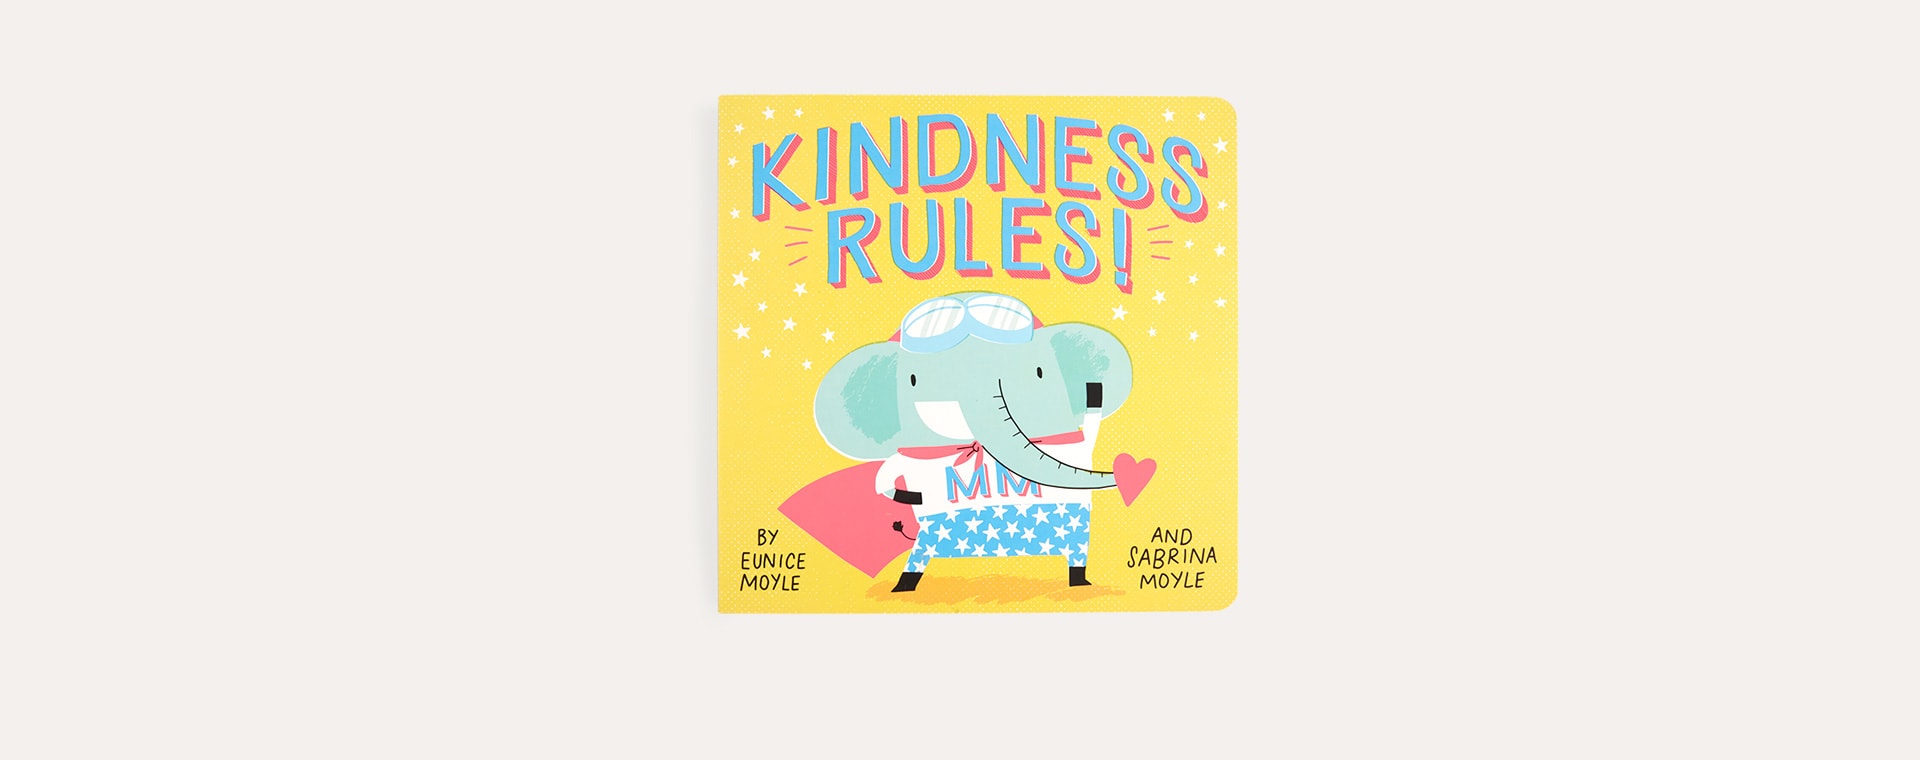 Multi Abrams & Chronicle Books Kindness Rules